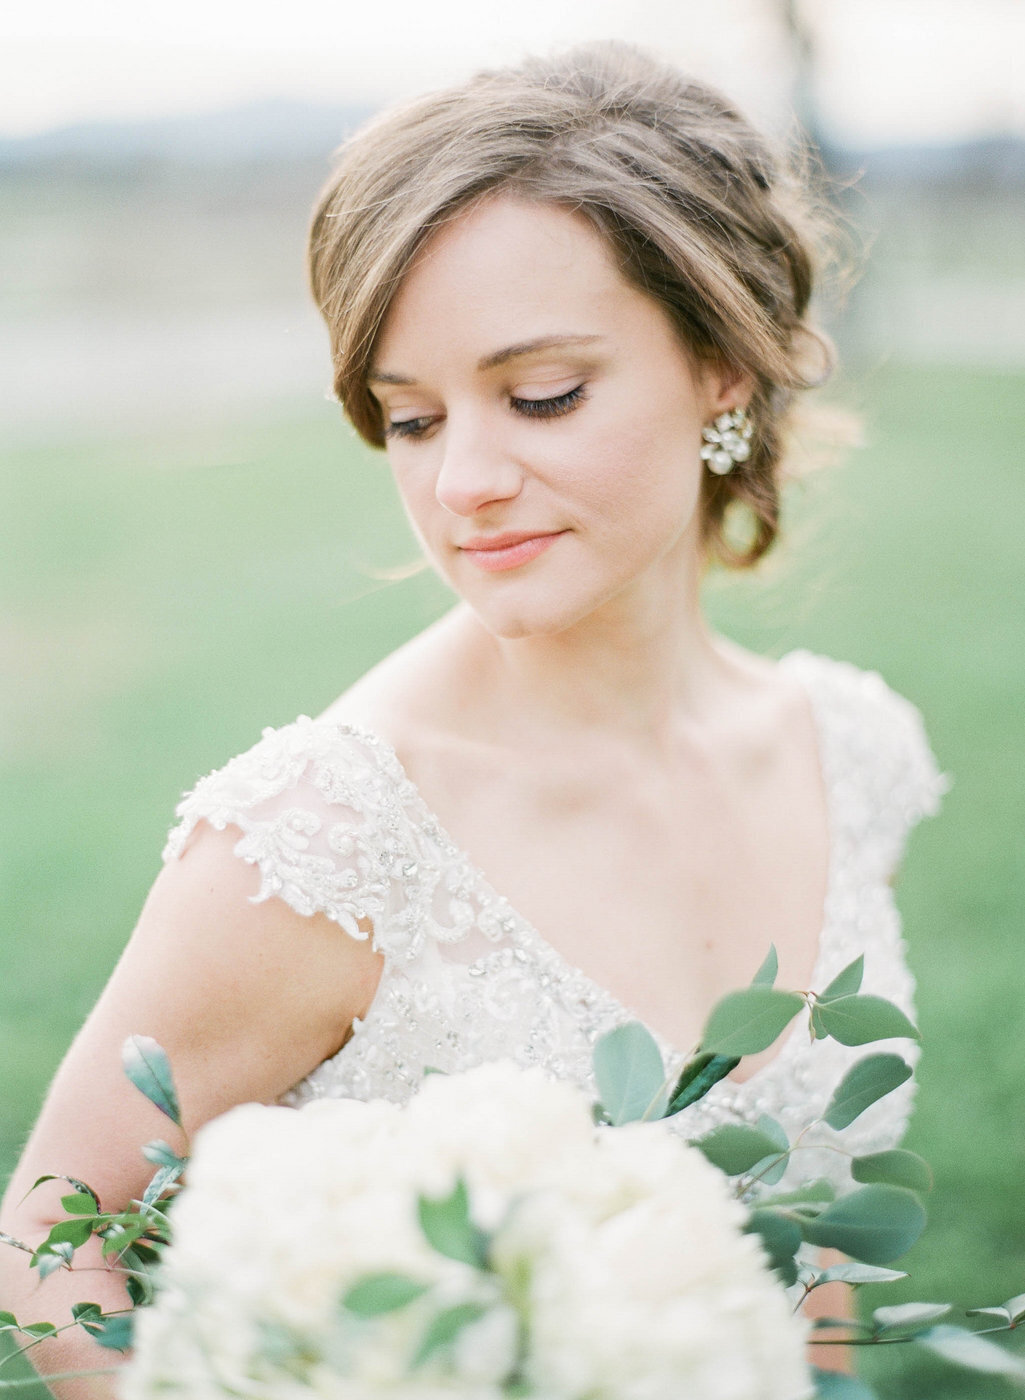 Brittany s Bridal Portraits-Brittany-0036